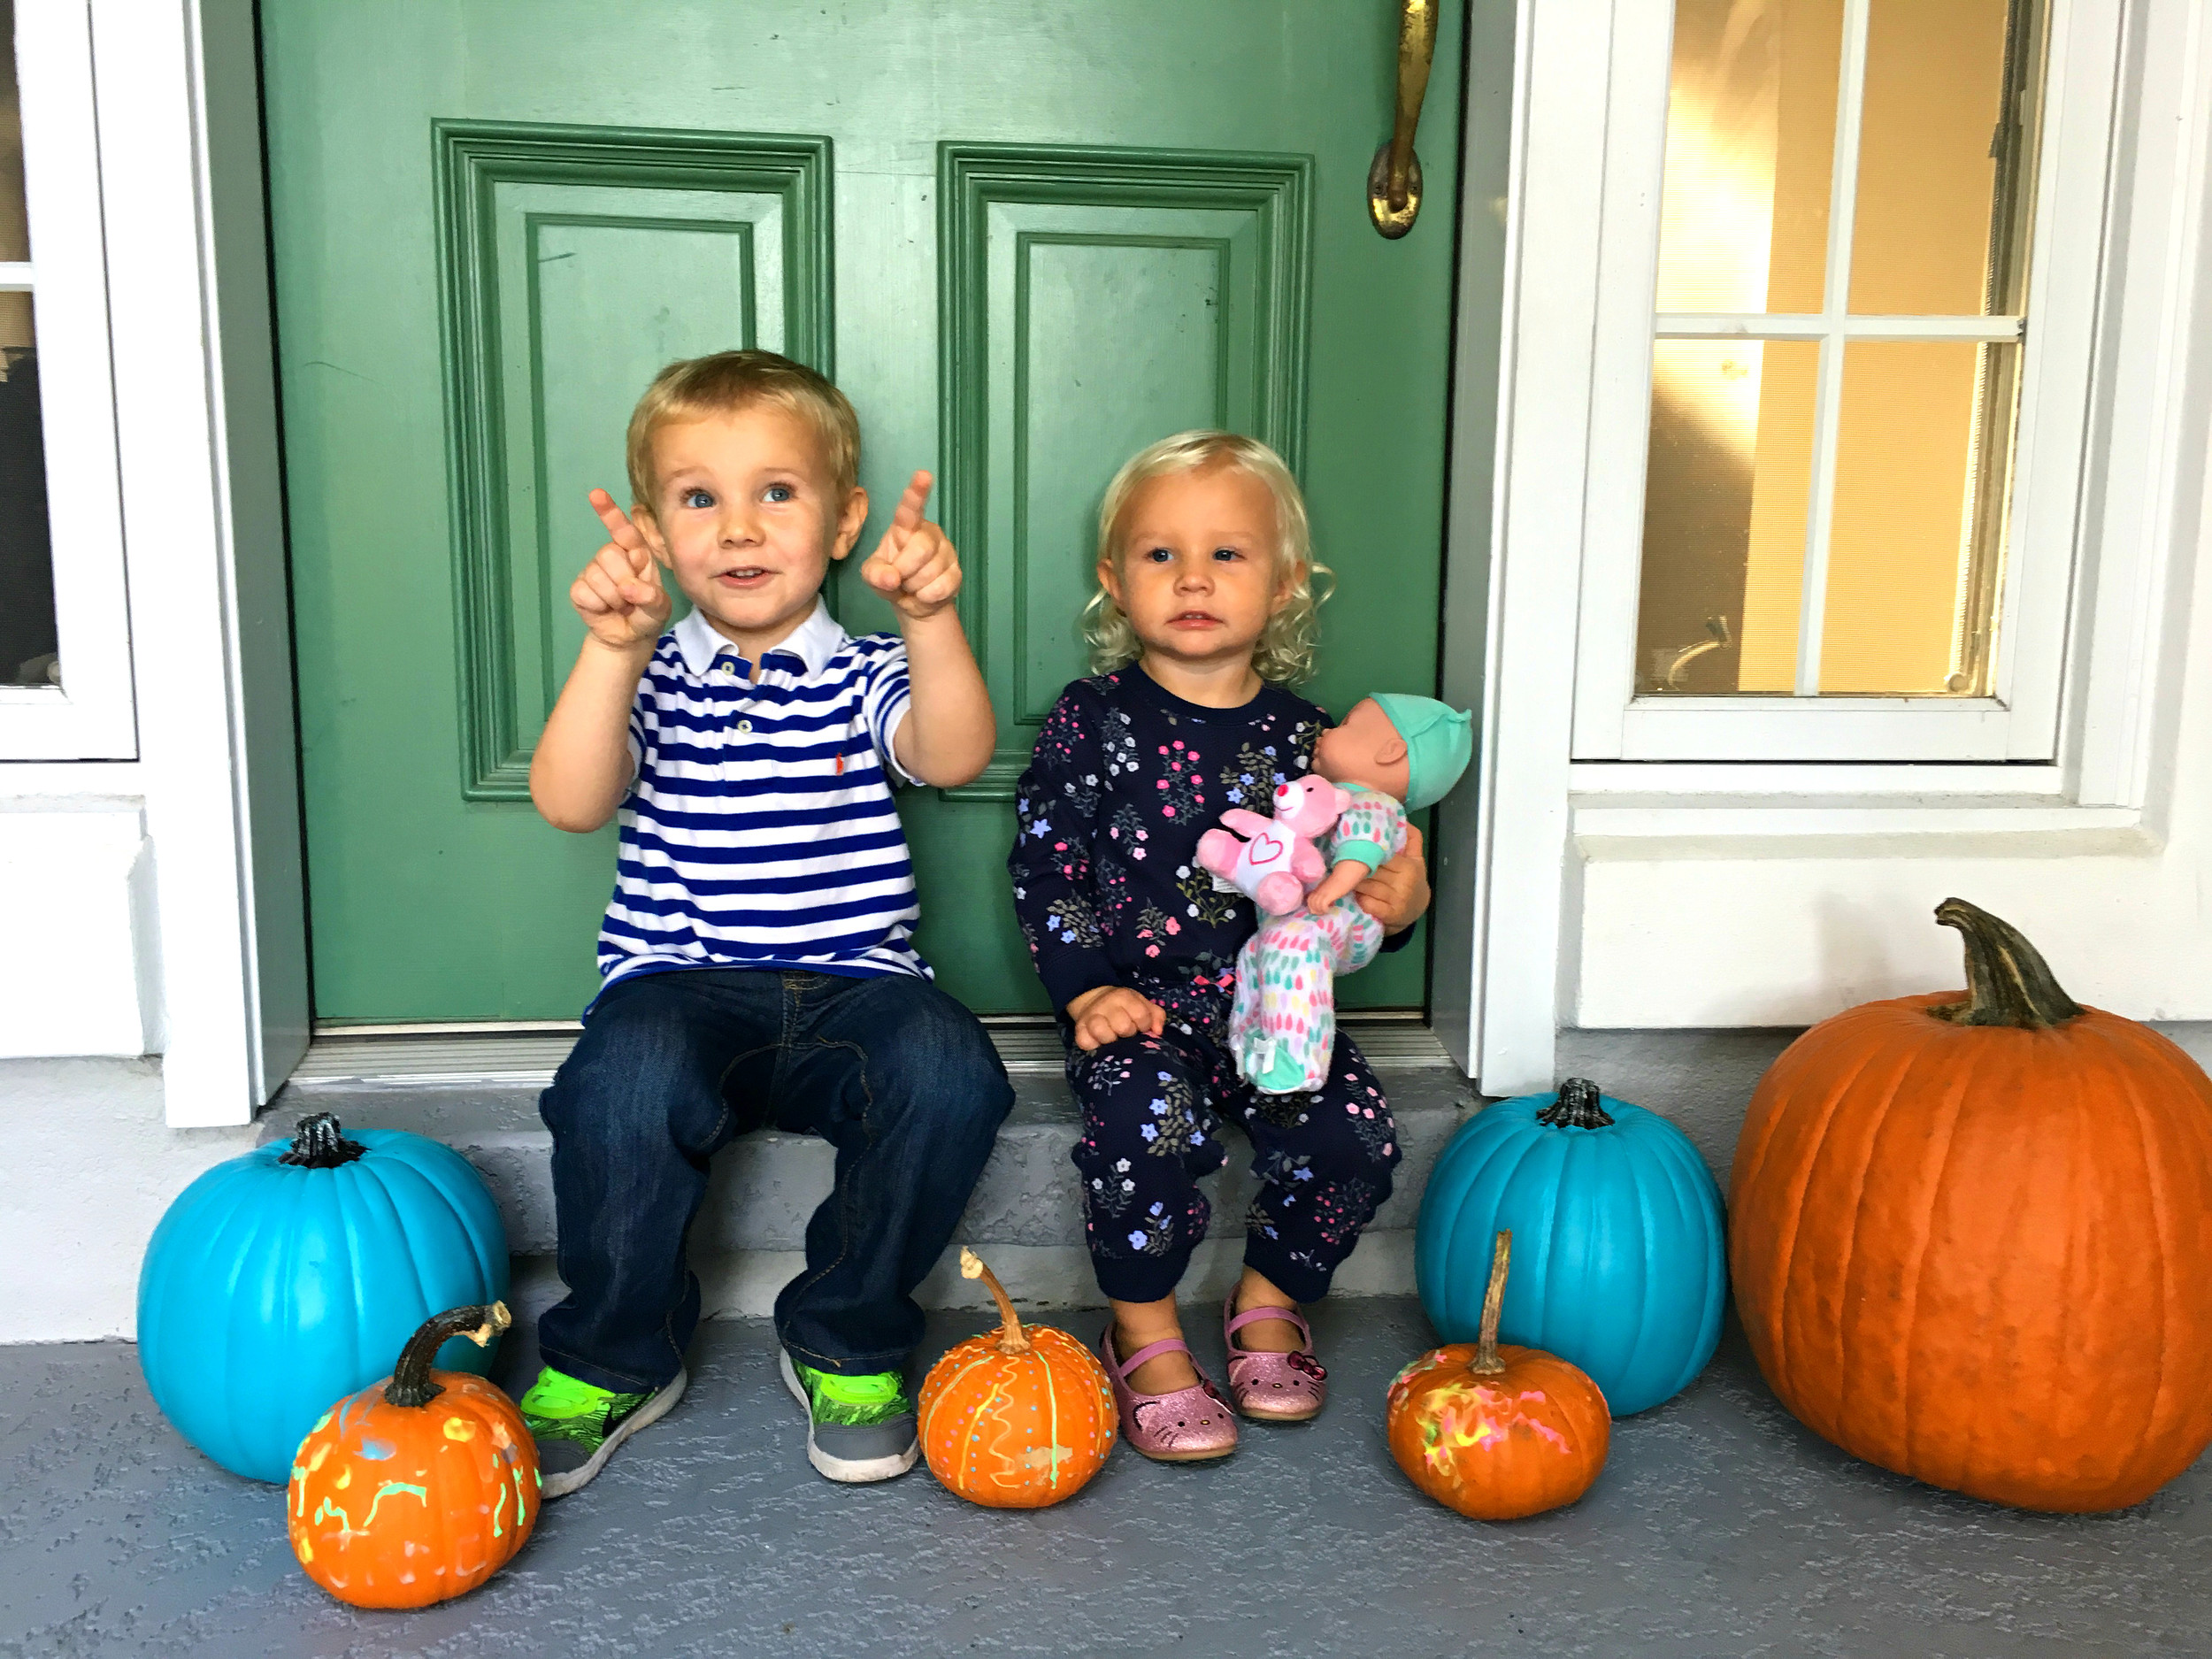 Jake and Abby with teal pumpkins